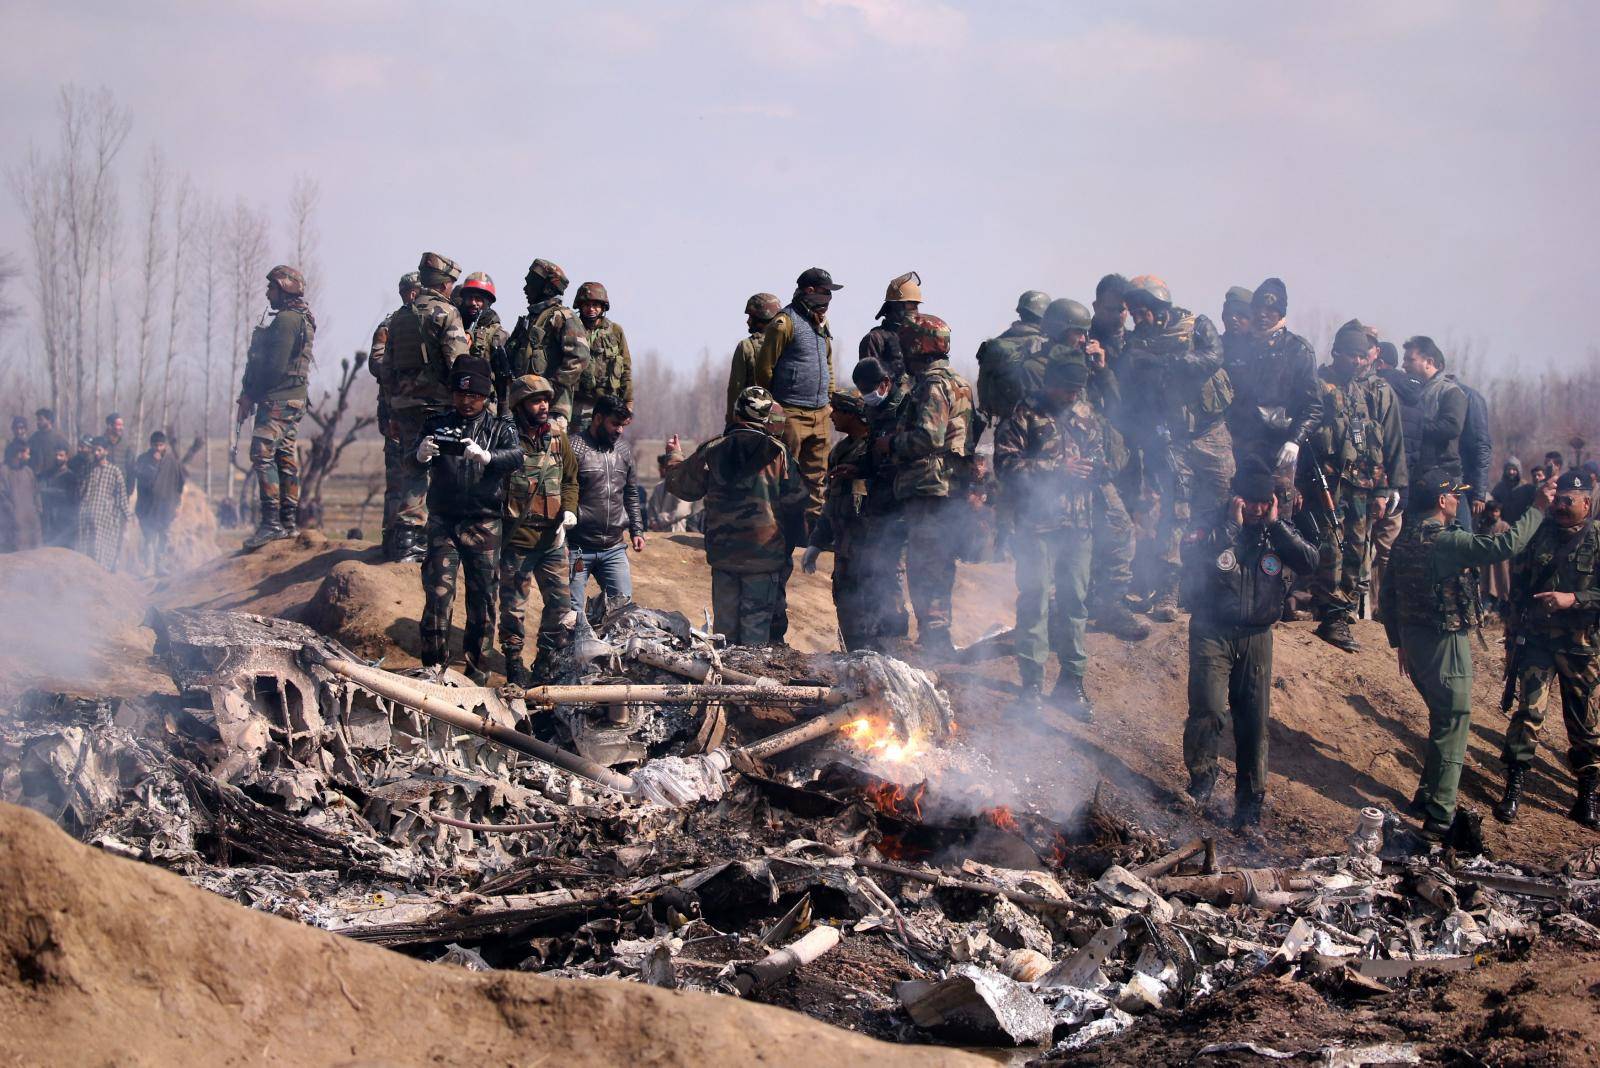 Indian soldiers stand next to the wreckage of Indian Air Force's helicopter after it crashed in Budgam district